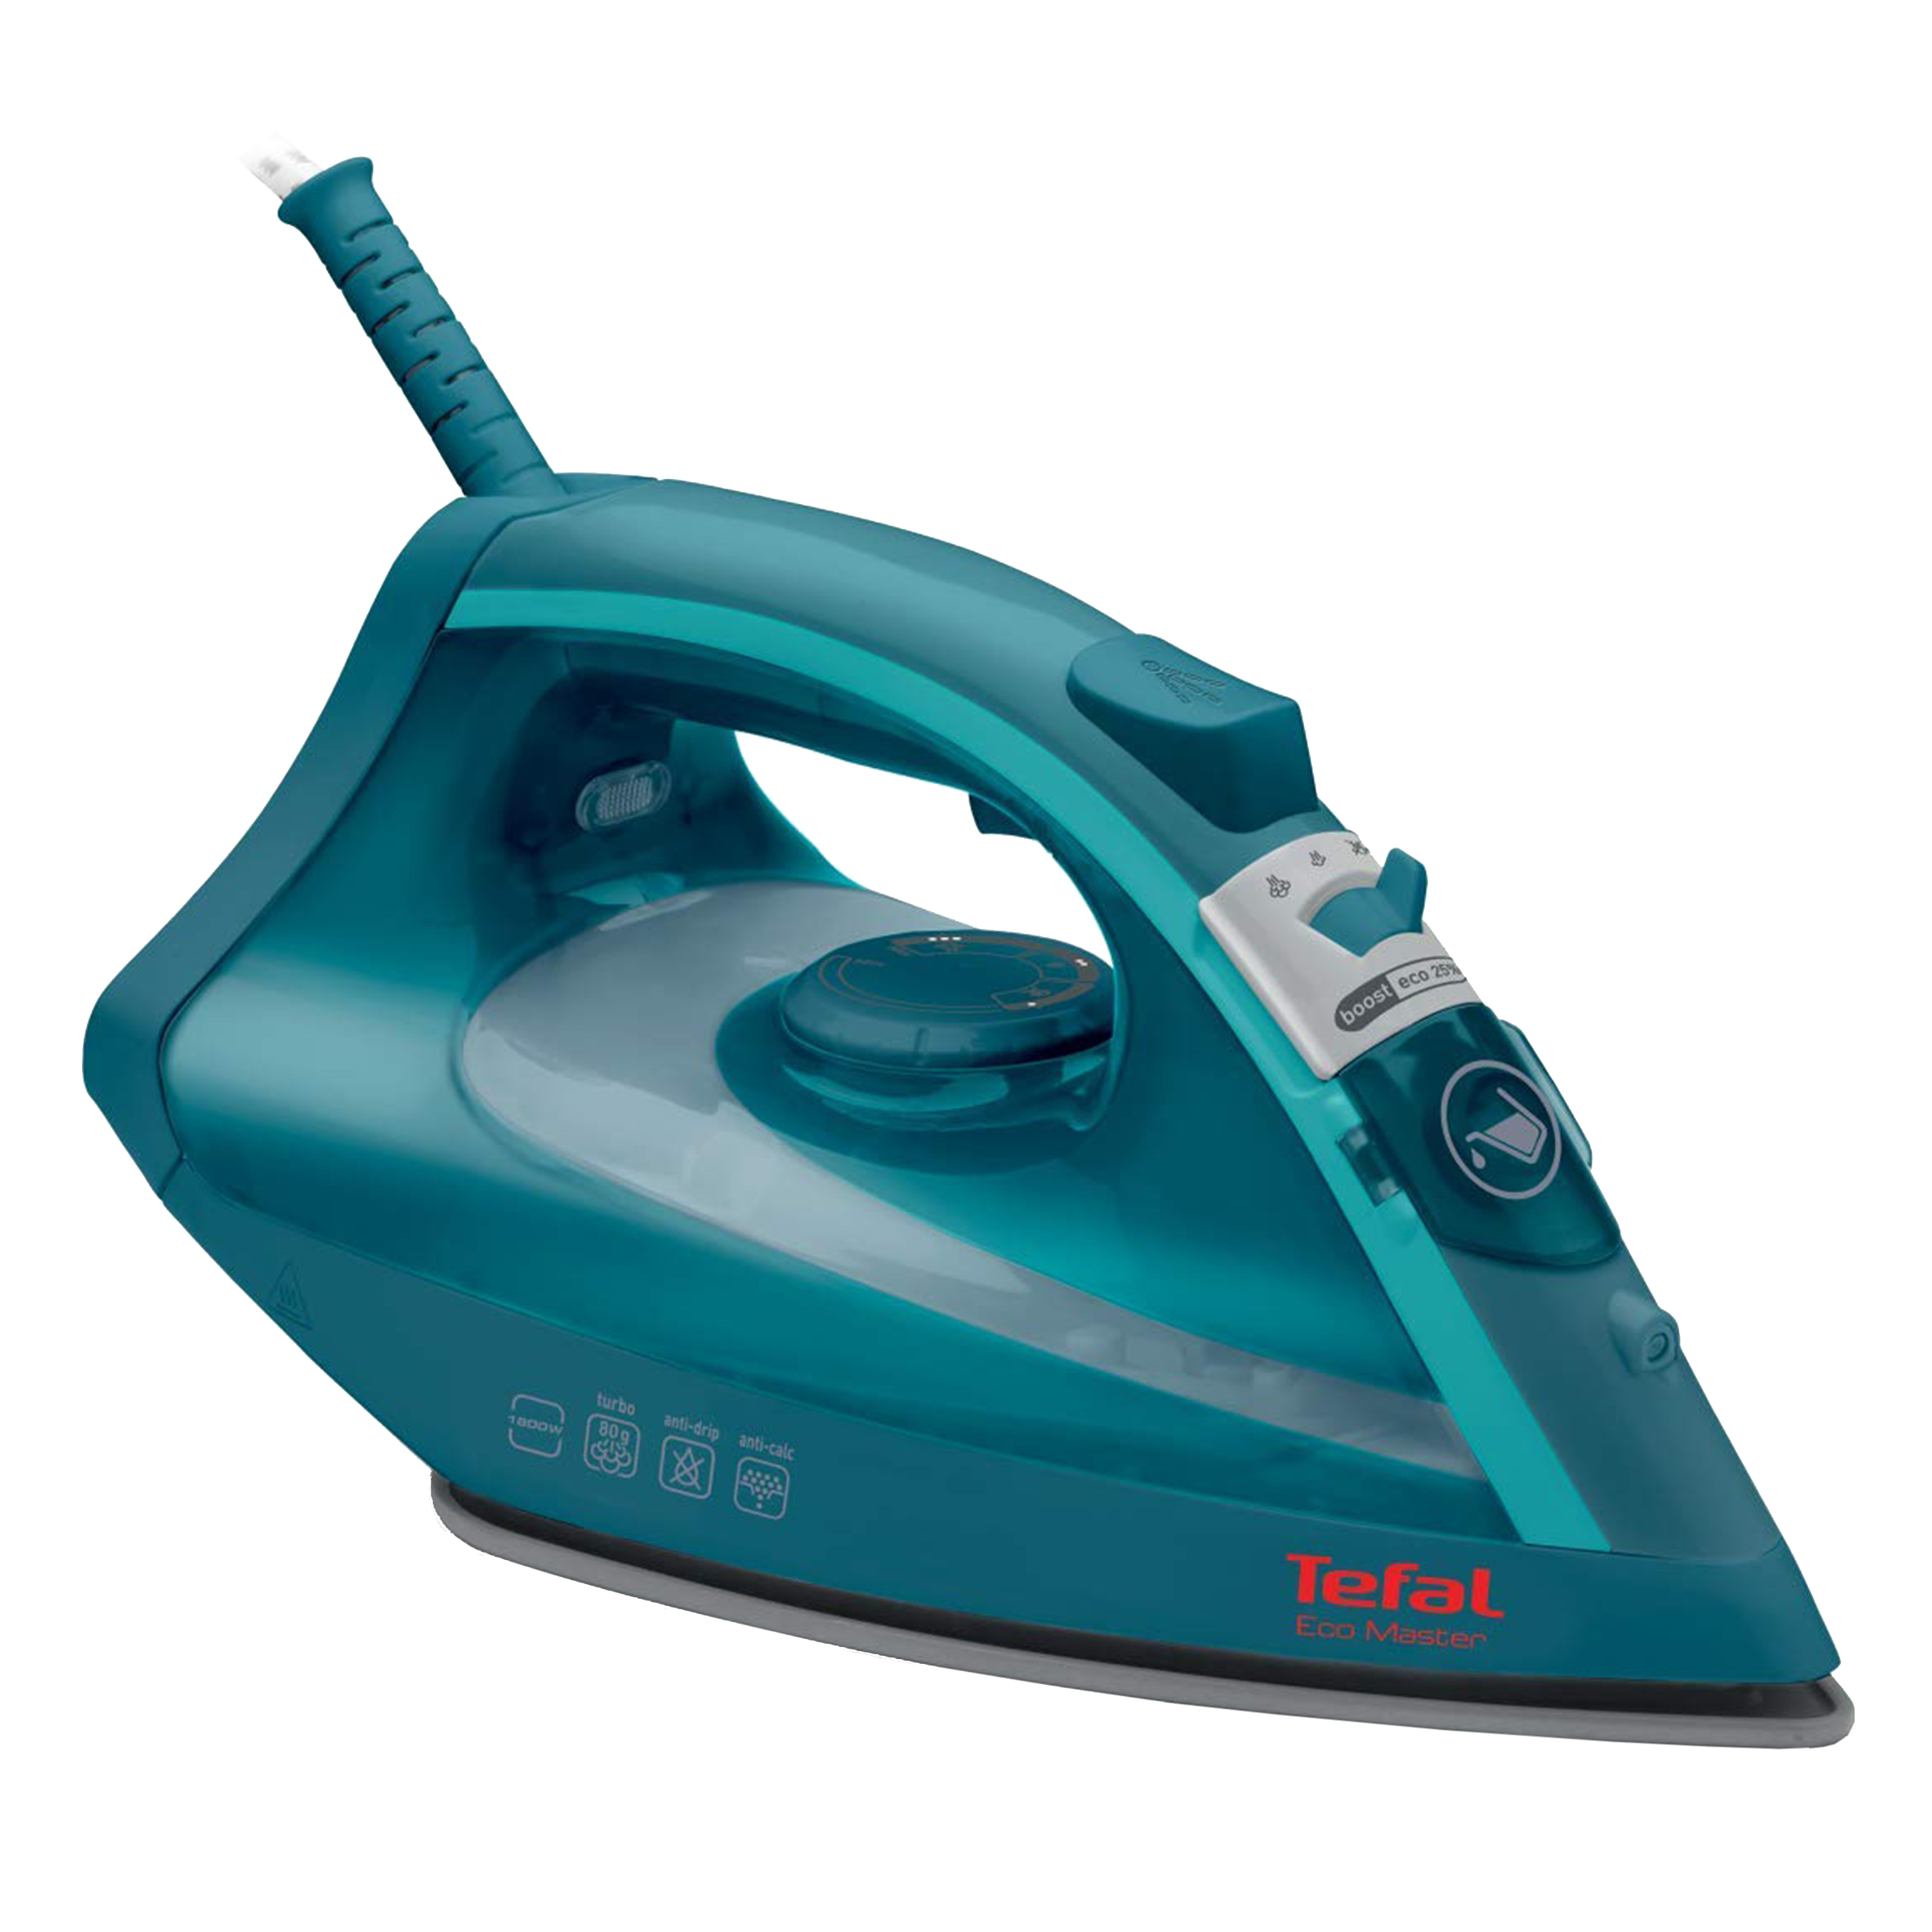 Tefal Eco Master 1800 Watts 200ml Steam Iron (Smooth-Gliding Non-Stick Soleplate, FV1720O1, Turkish Blue)